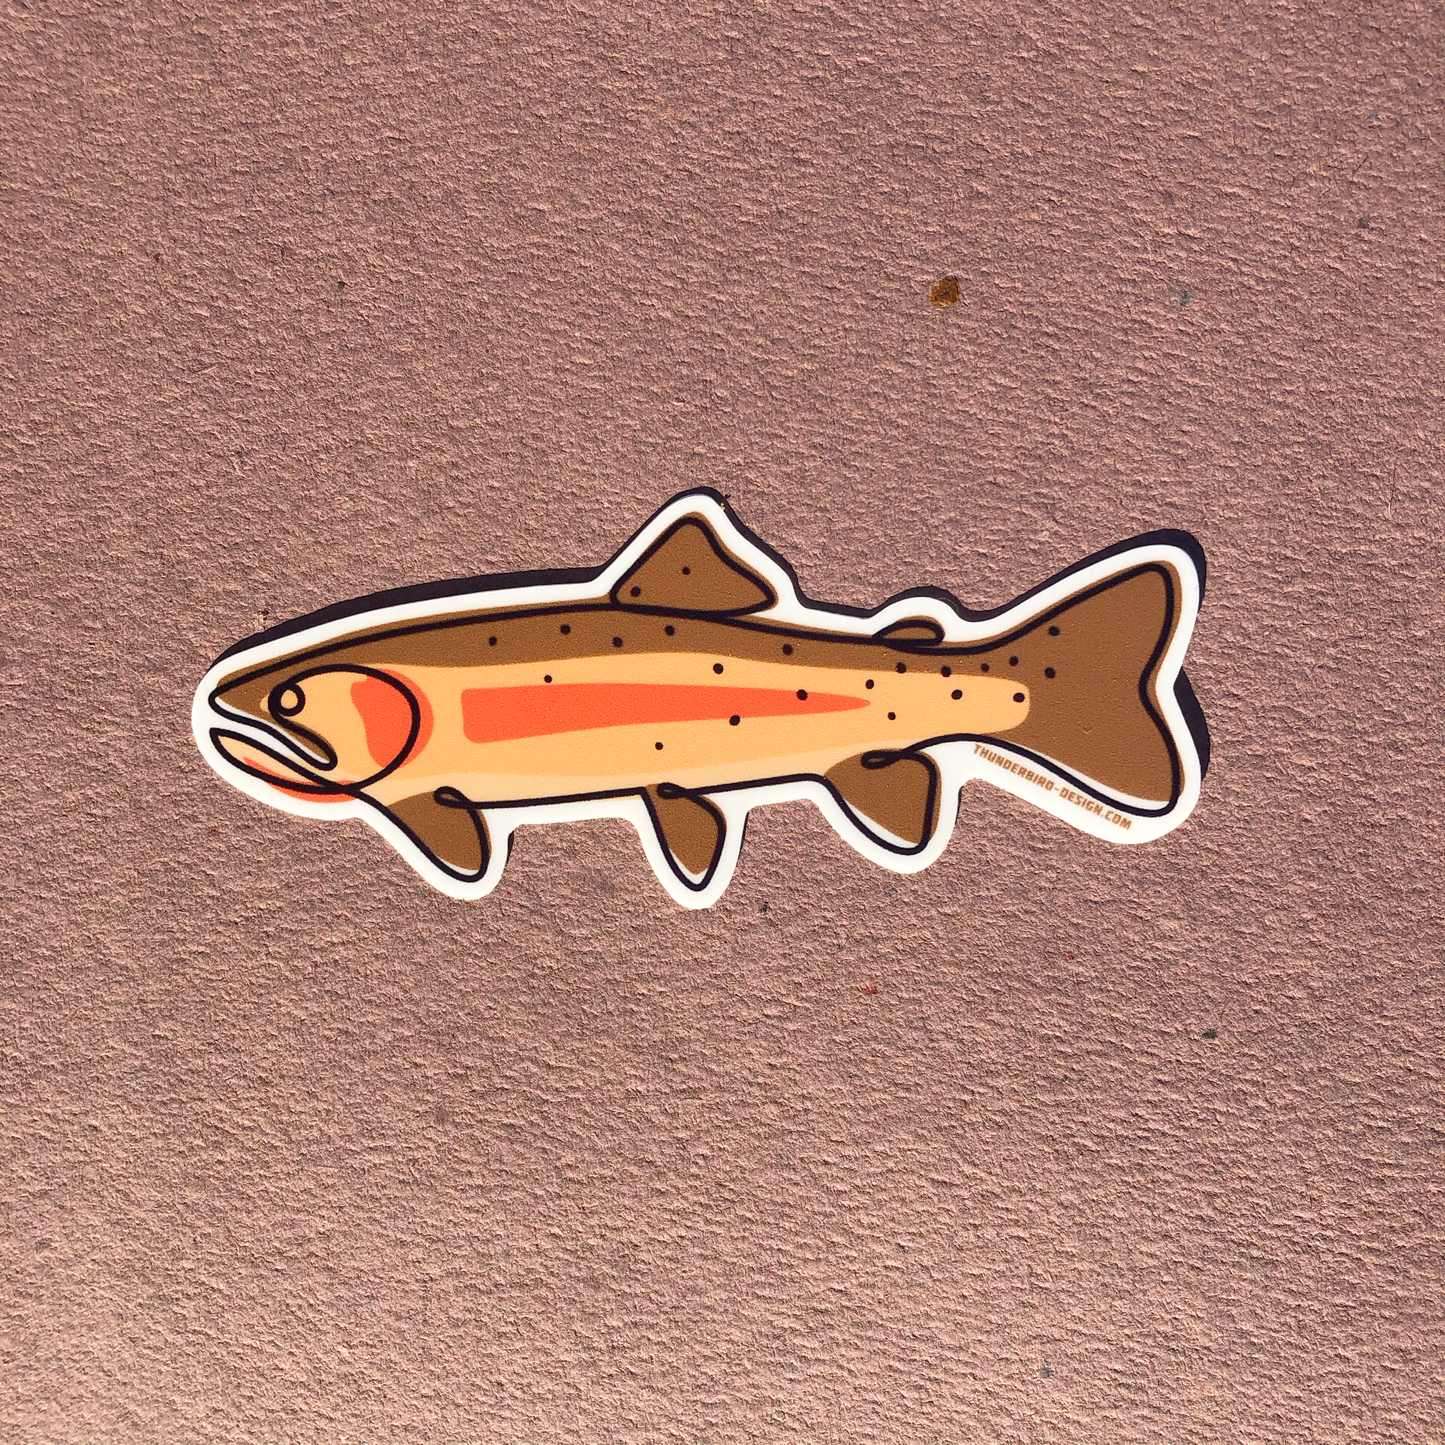 Thunderbird Outdoor SupplyCutthroat Trout -Single Line Series Decal w/ Matte FinishCutthroat Trout -Single Line Series Decal
Drawn, Single Line Contour Illustration of a Cutthroat Trout.These  4" weatherproof Matte decals are perfect for your Rod tube, water bottle, tackle box, car window